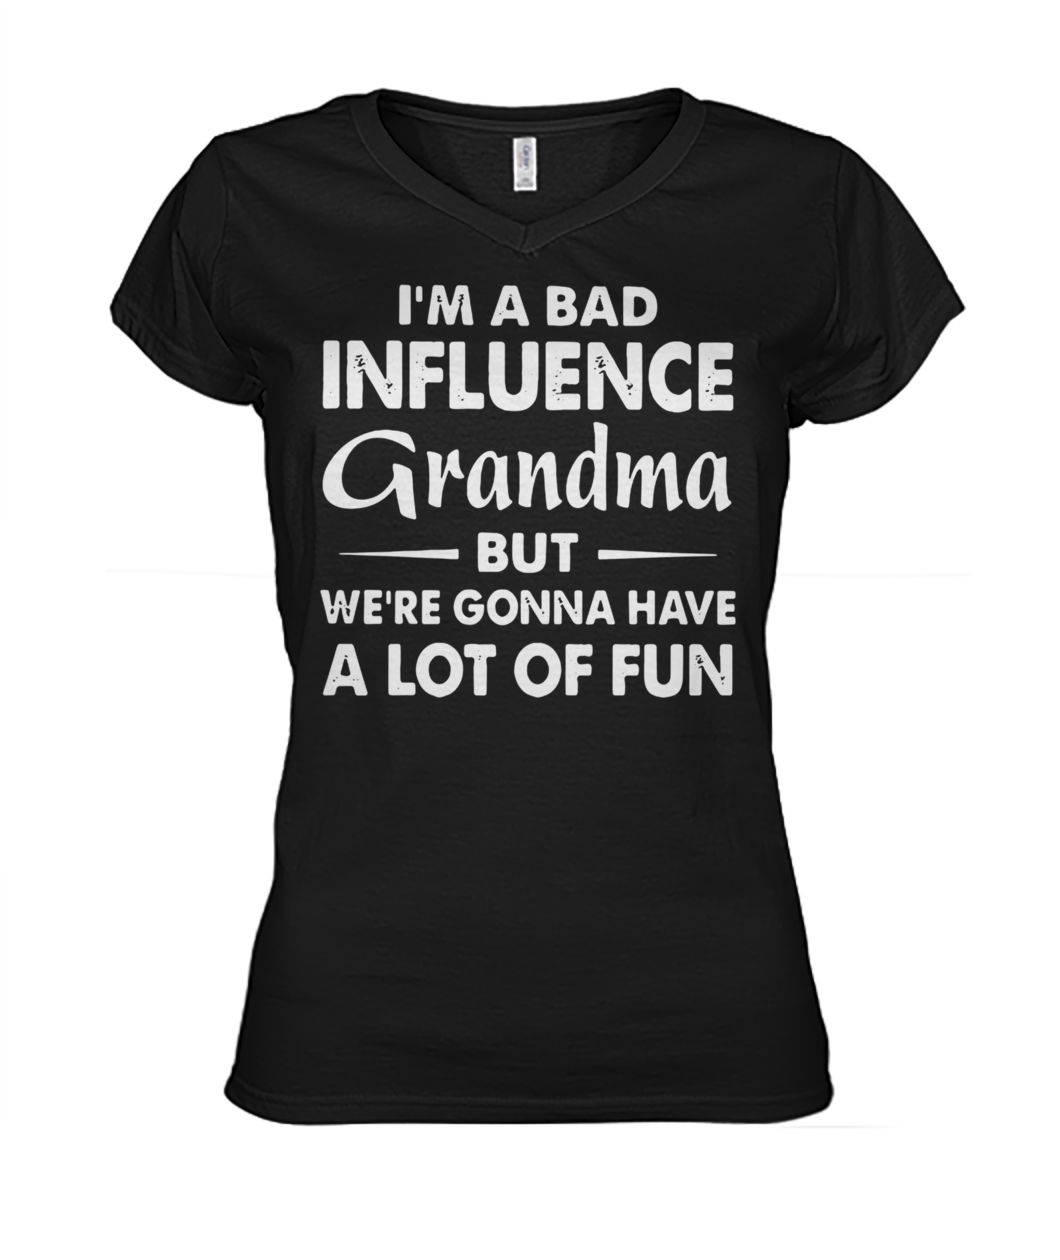 I'm a bad influence grandma but we're gonna have a lot of fun women's v-neck